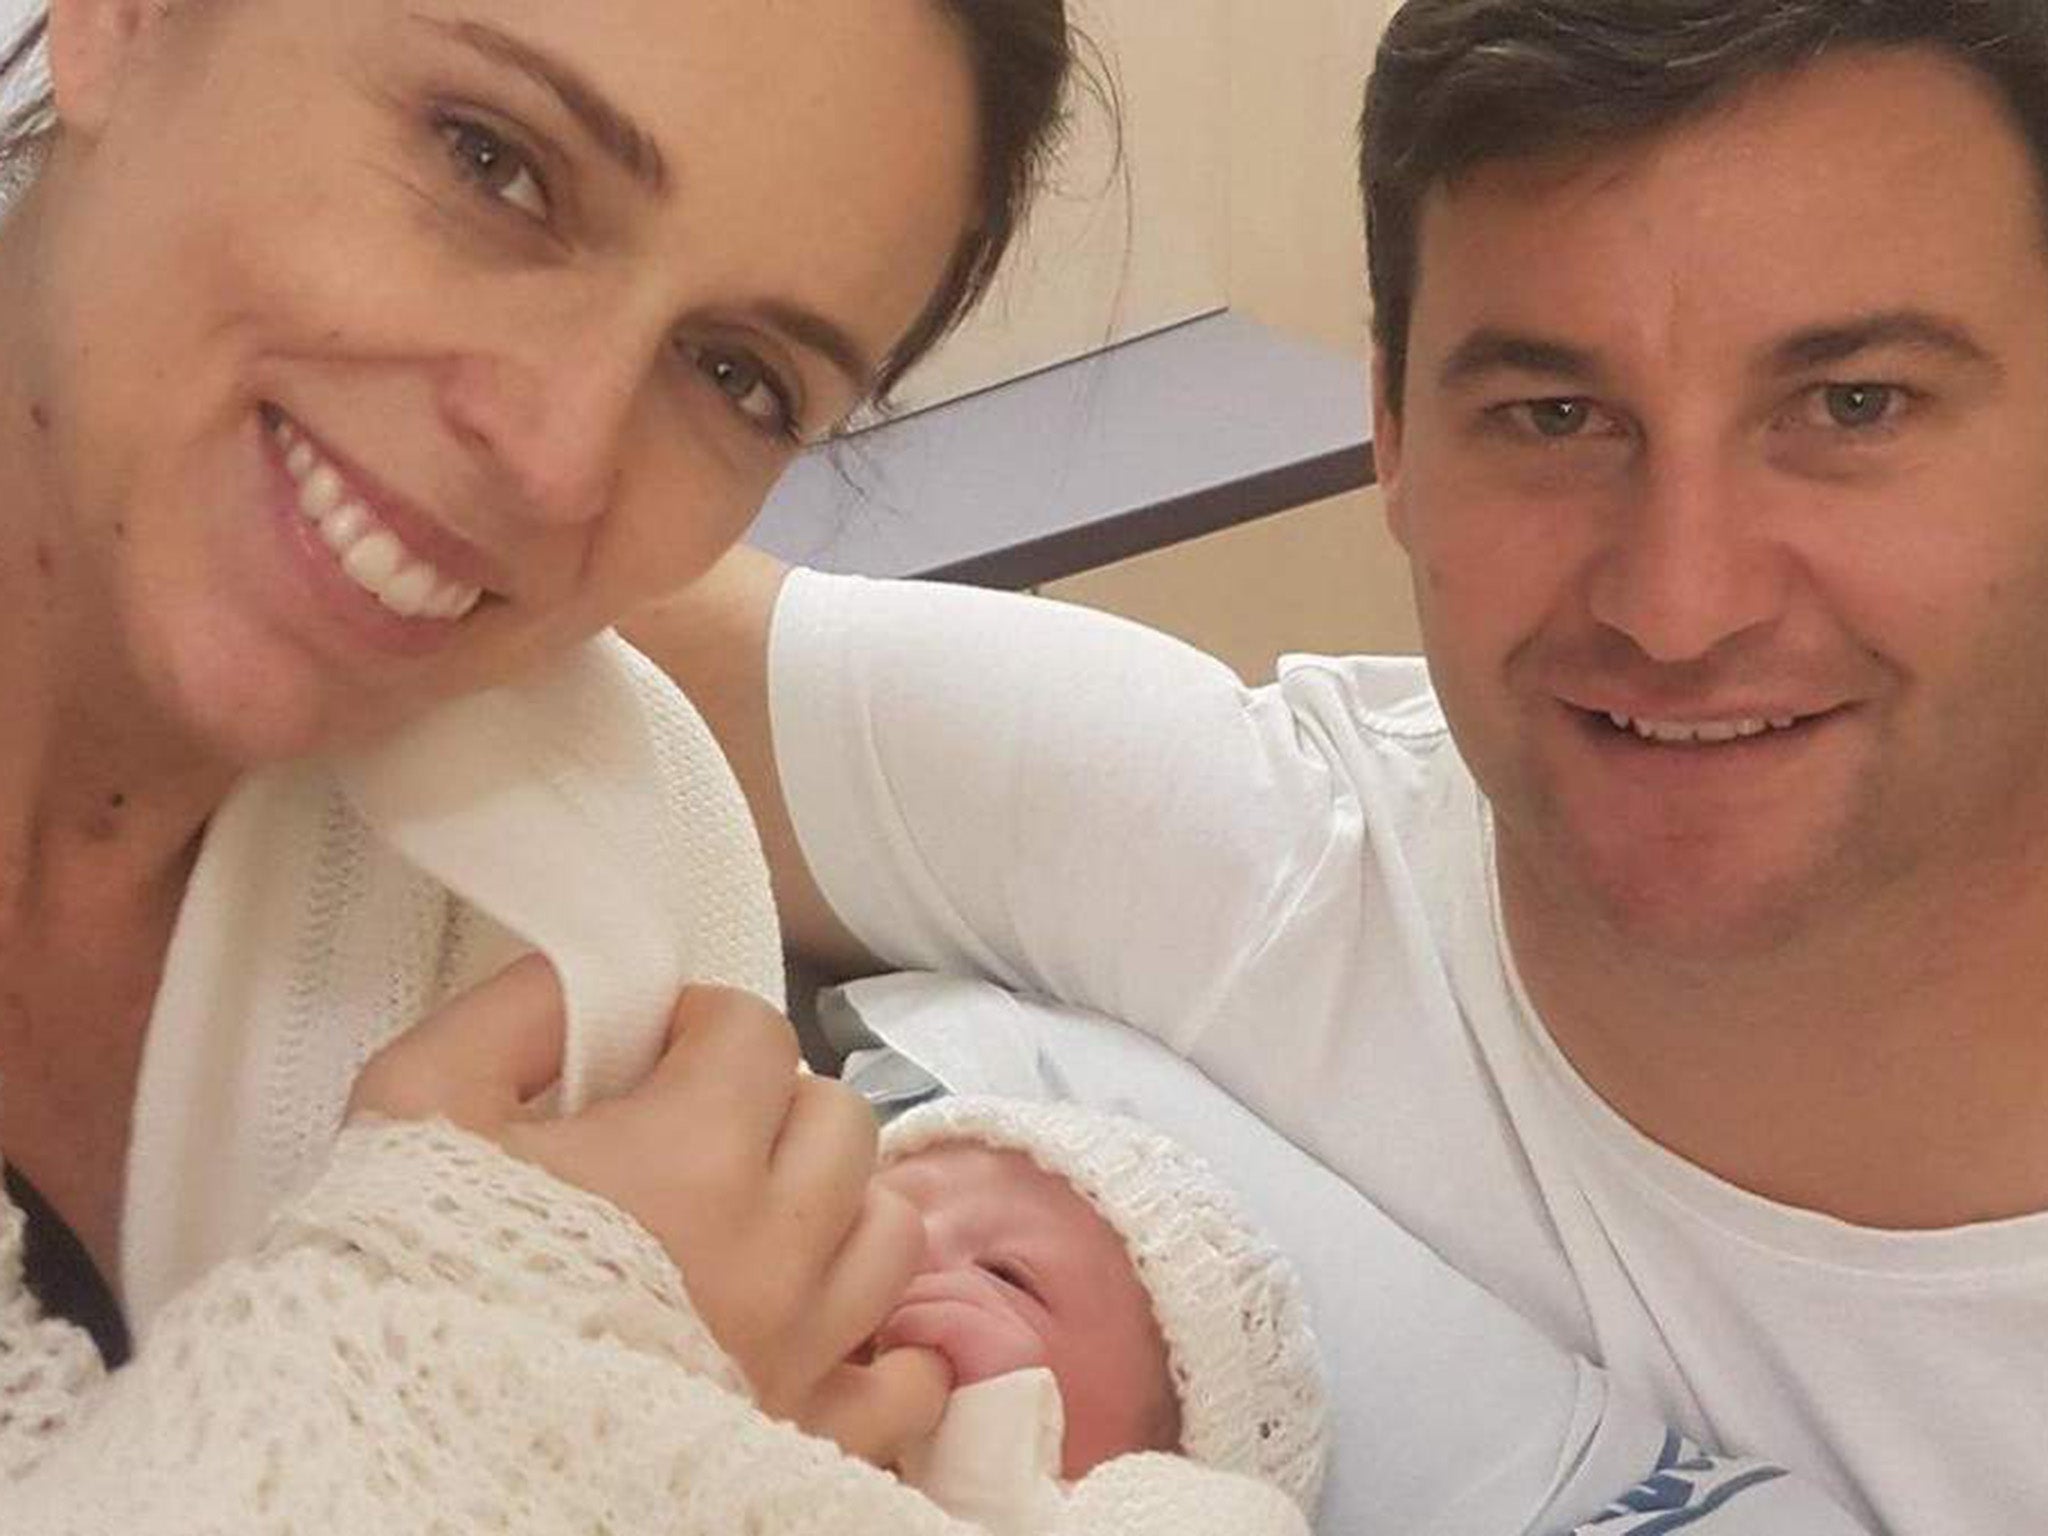 New Zealand's Prime Minister Jacinda Ardern has had her first child with partner Clarke Gayford